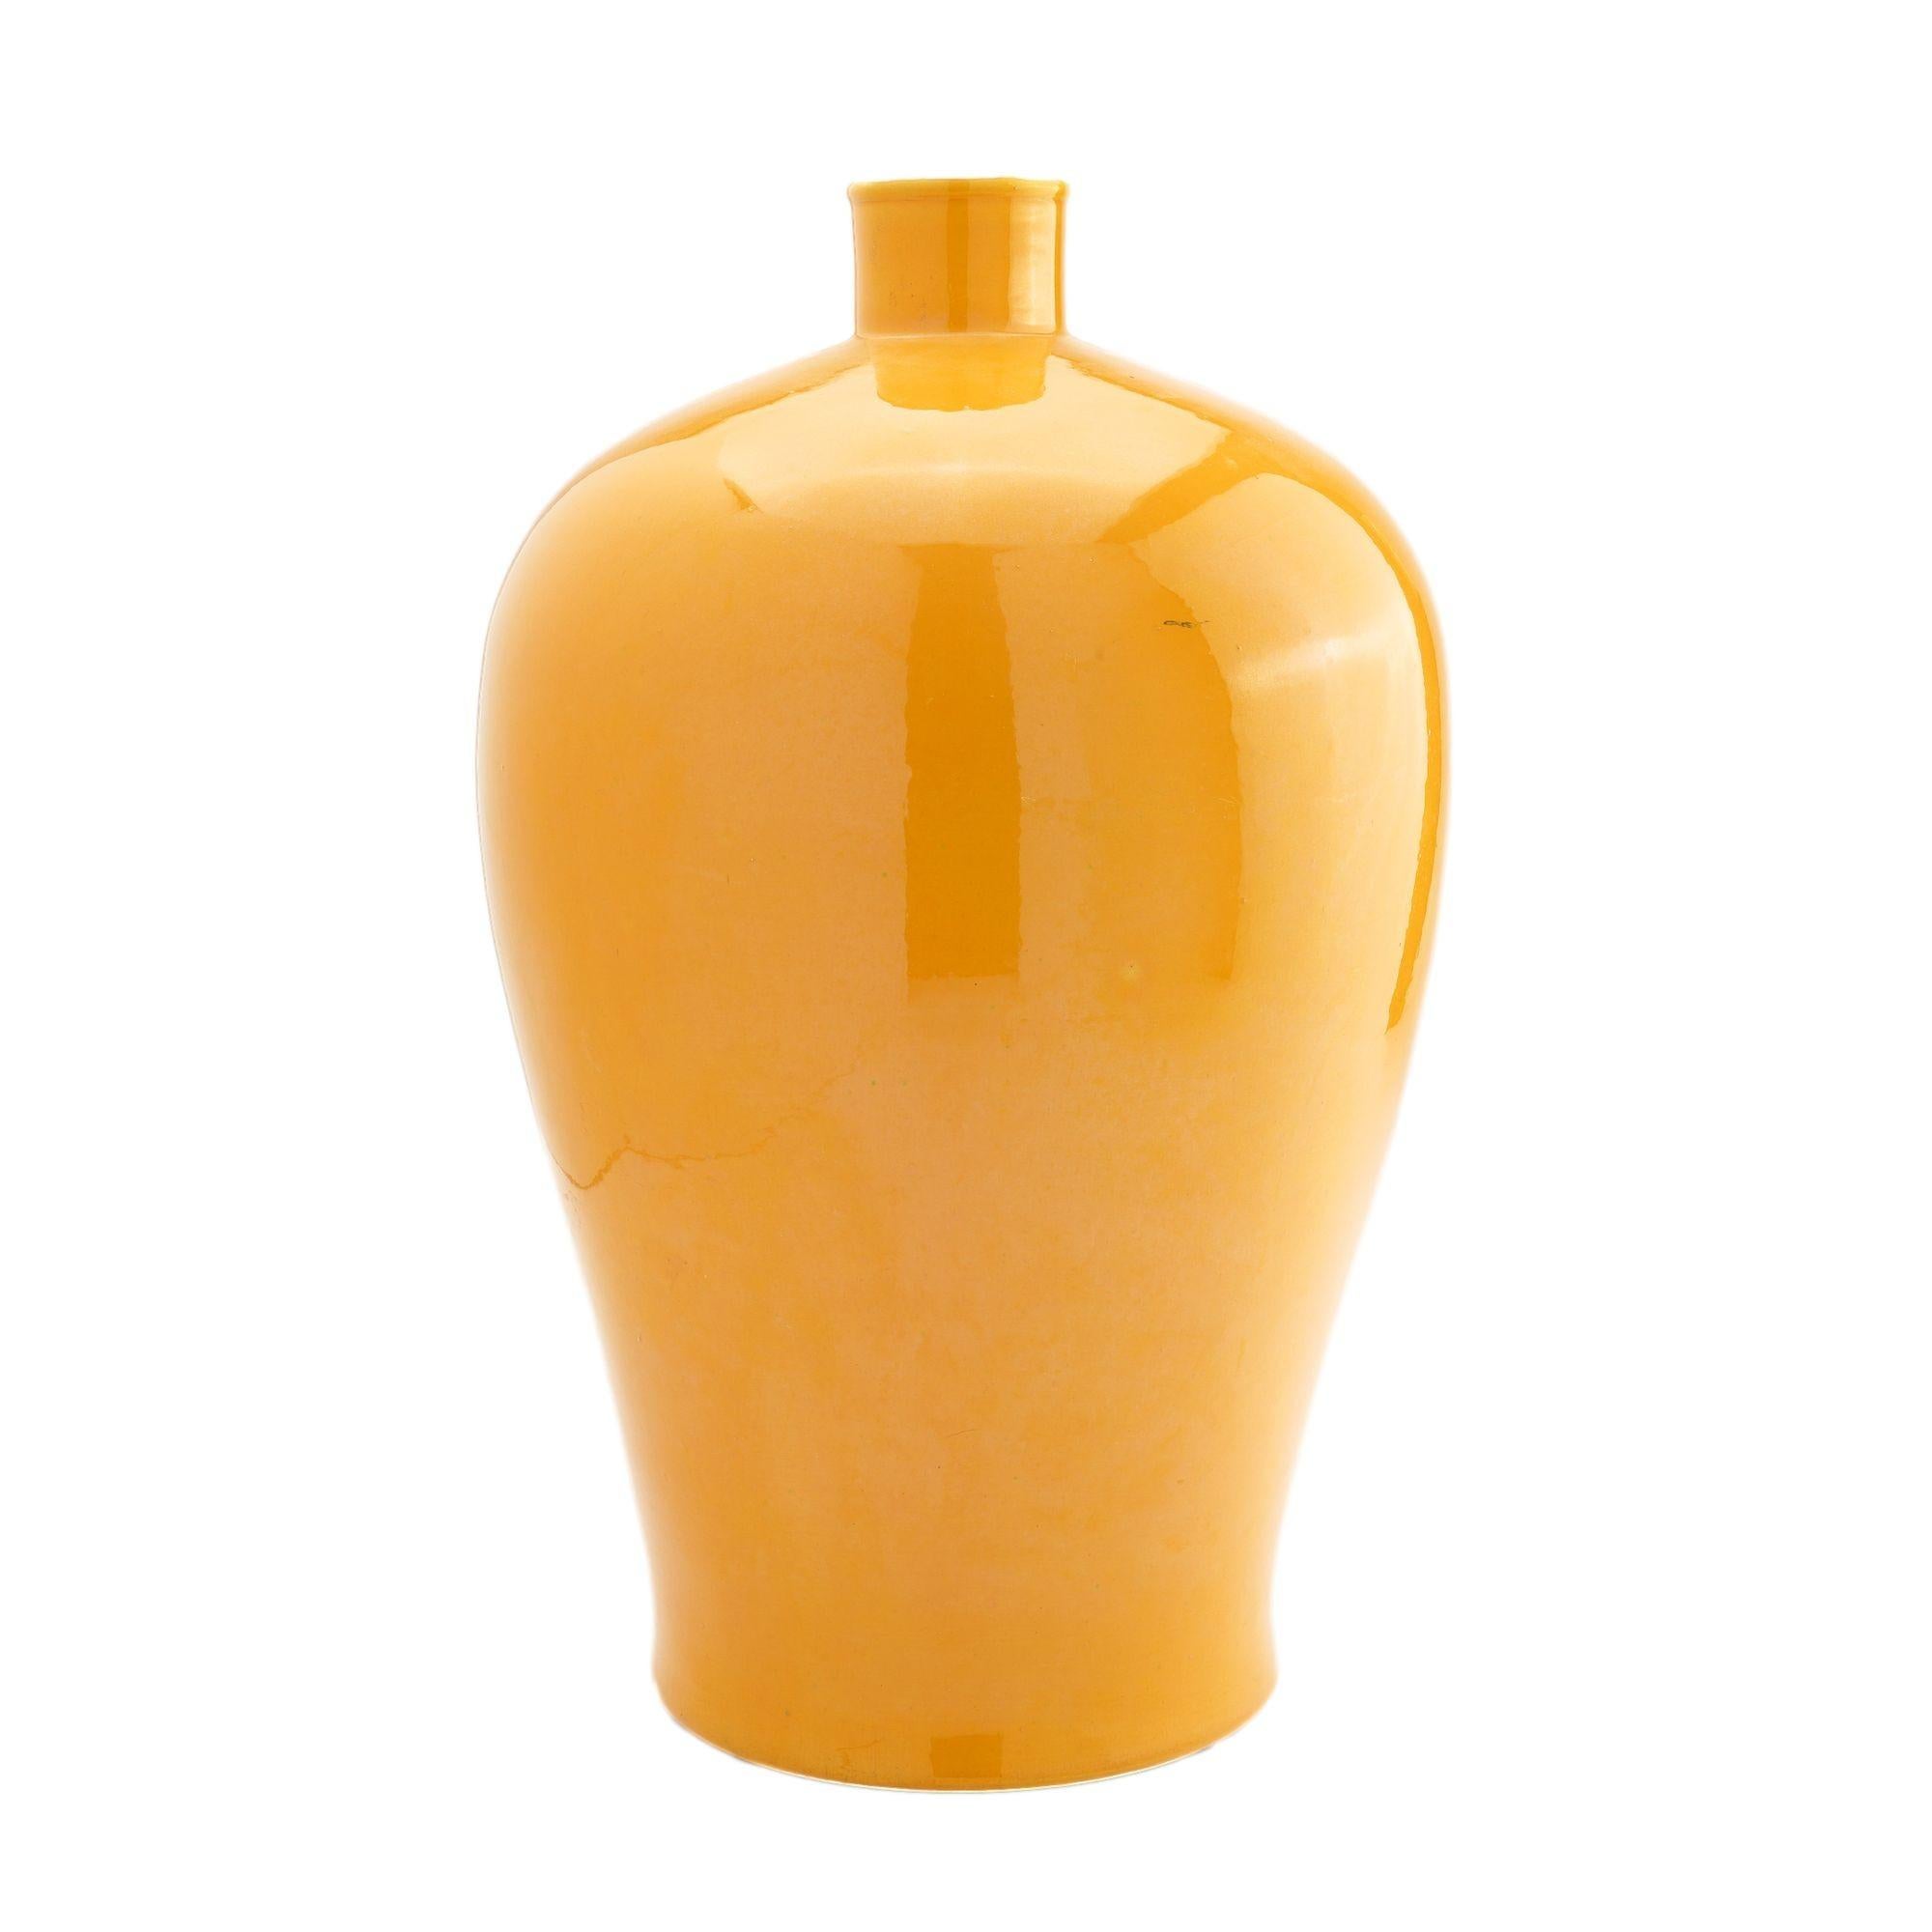 20th Century Chinese mei-ping form porcelain vase in Imperial yellow, c. 1912-1949 For Sale